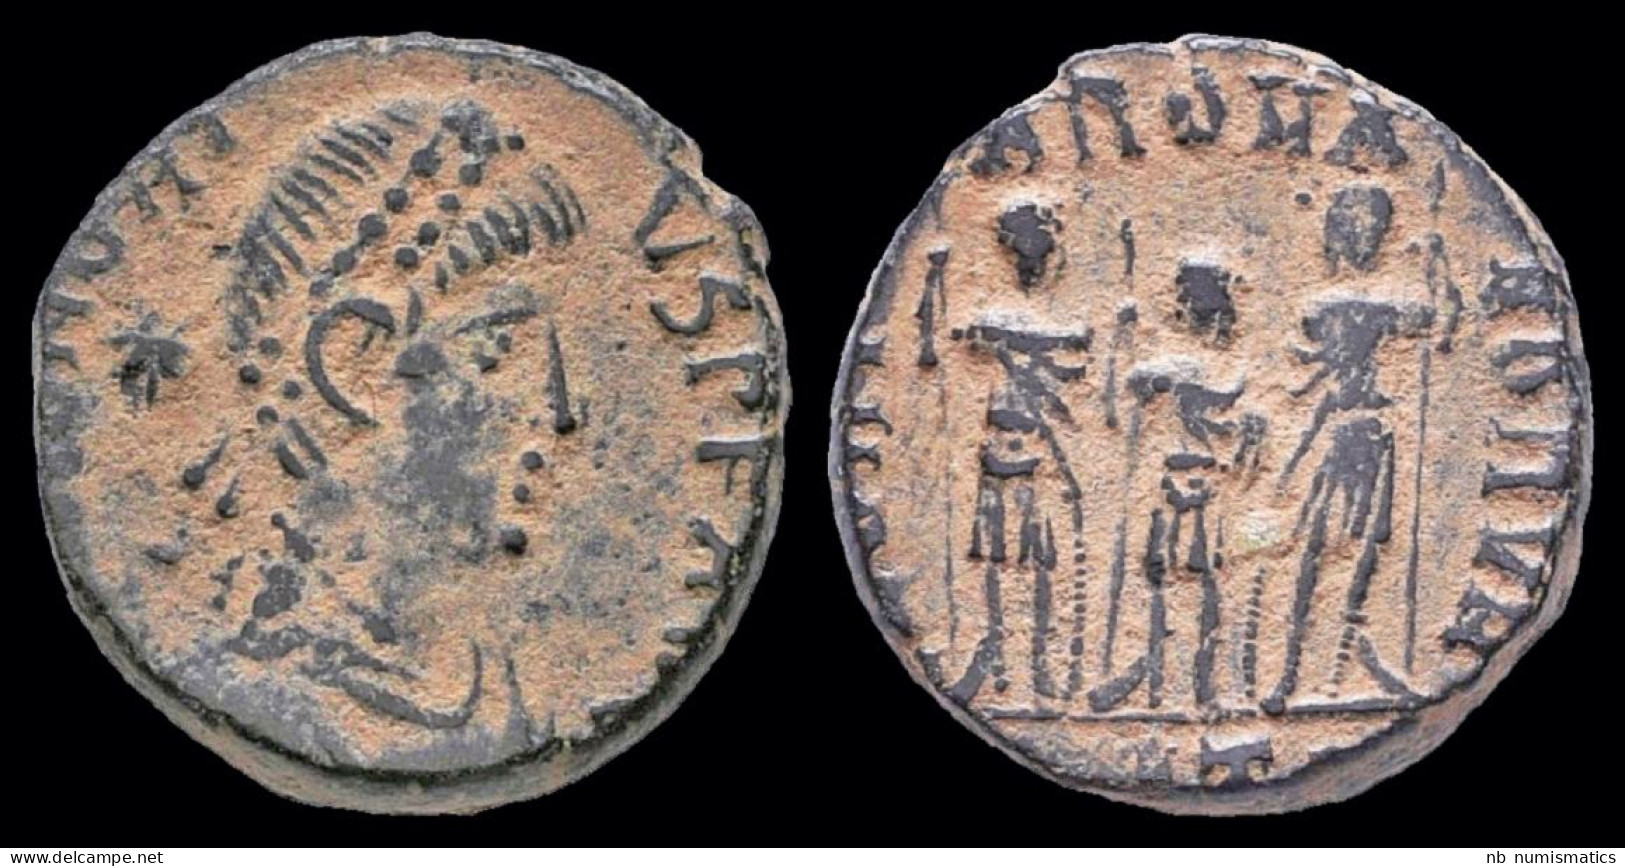 Honorius AE3 Three Emperors Staning Facing - The End Of Empire (363 AD To 476 AD)